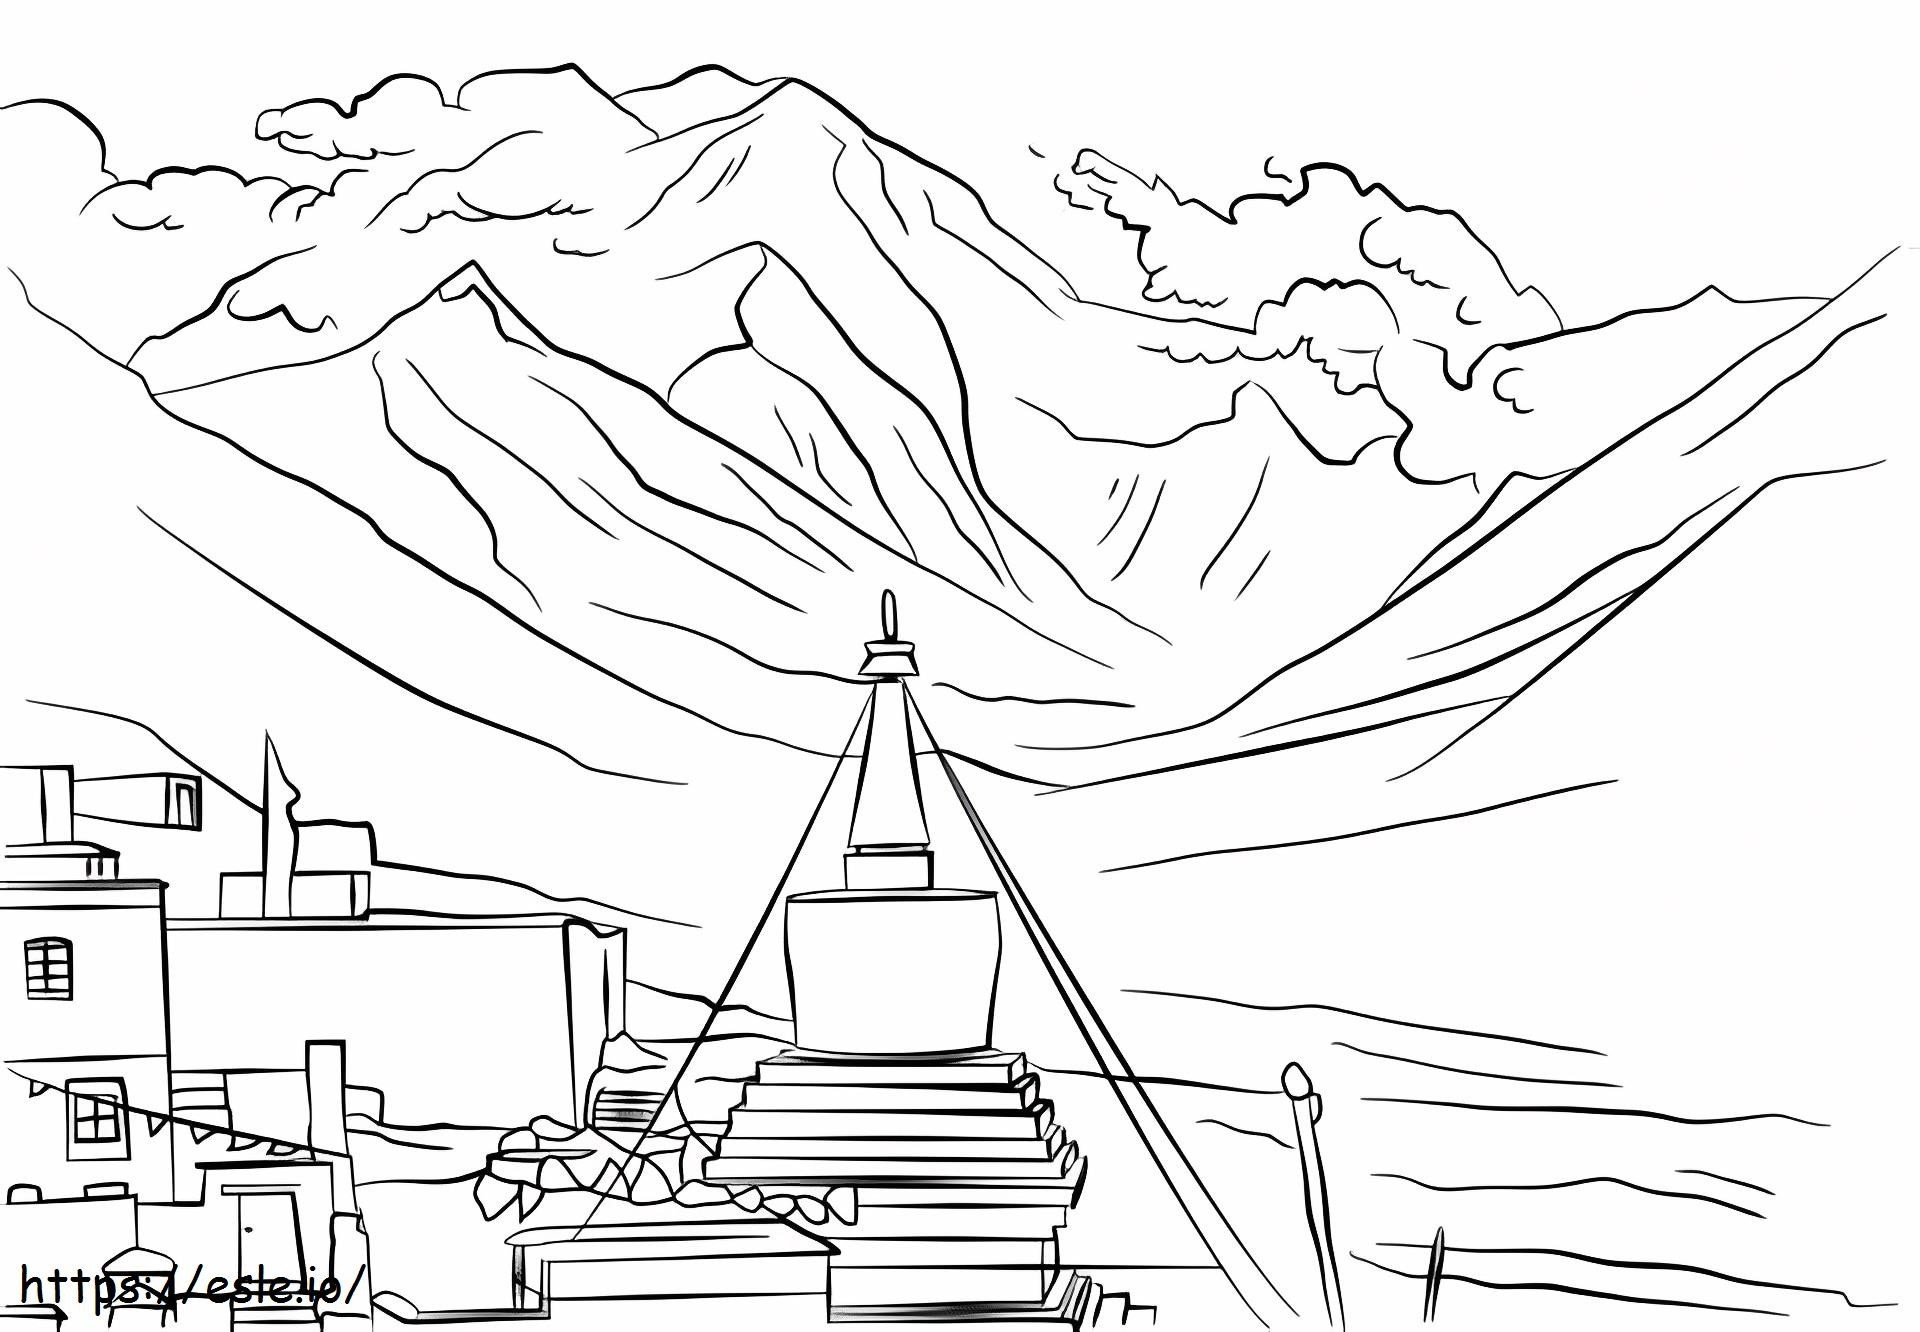 Montana Del Everest coloring page